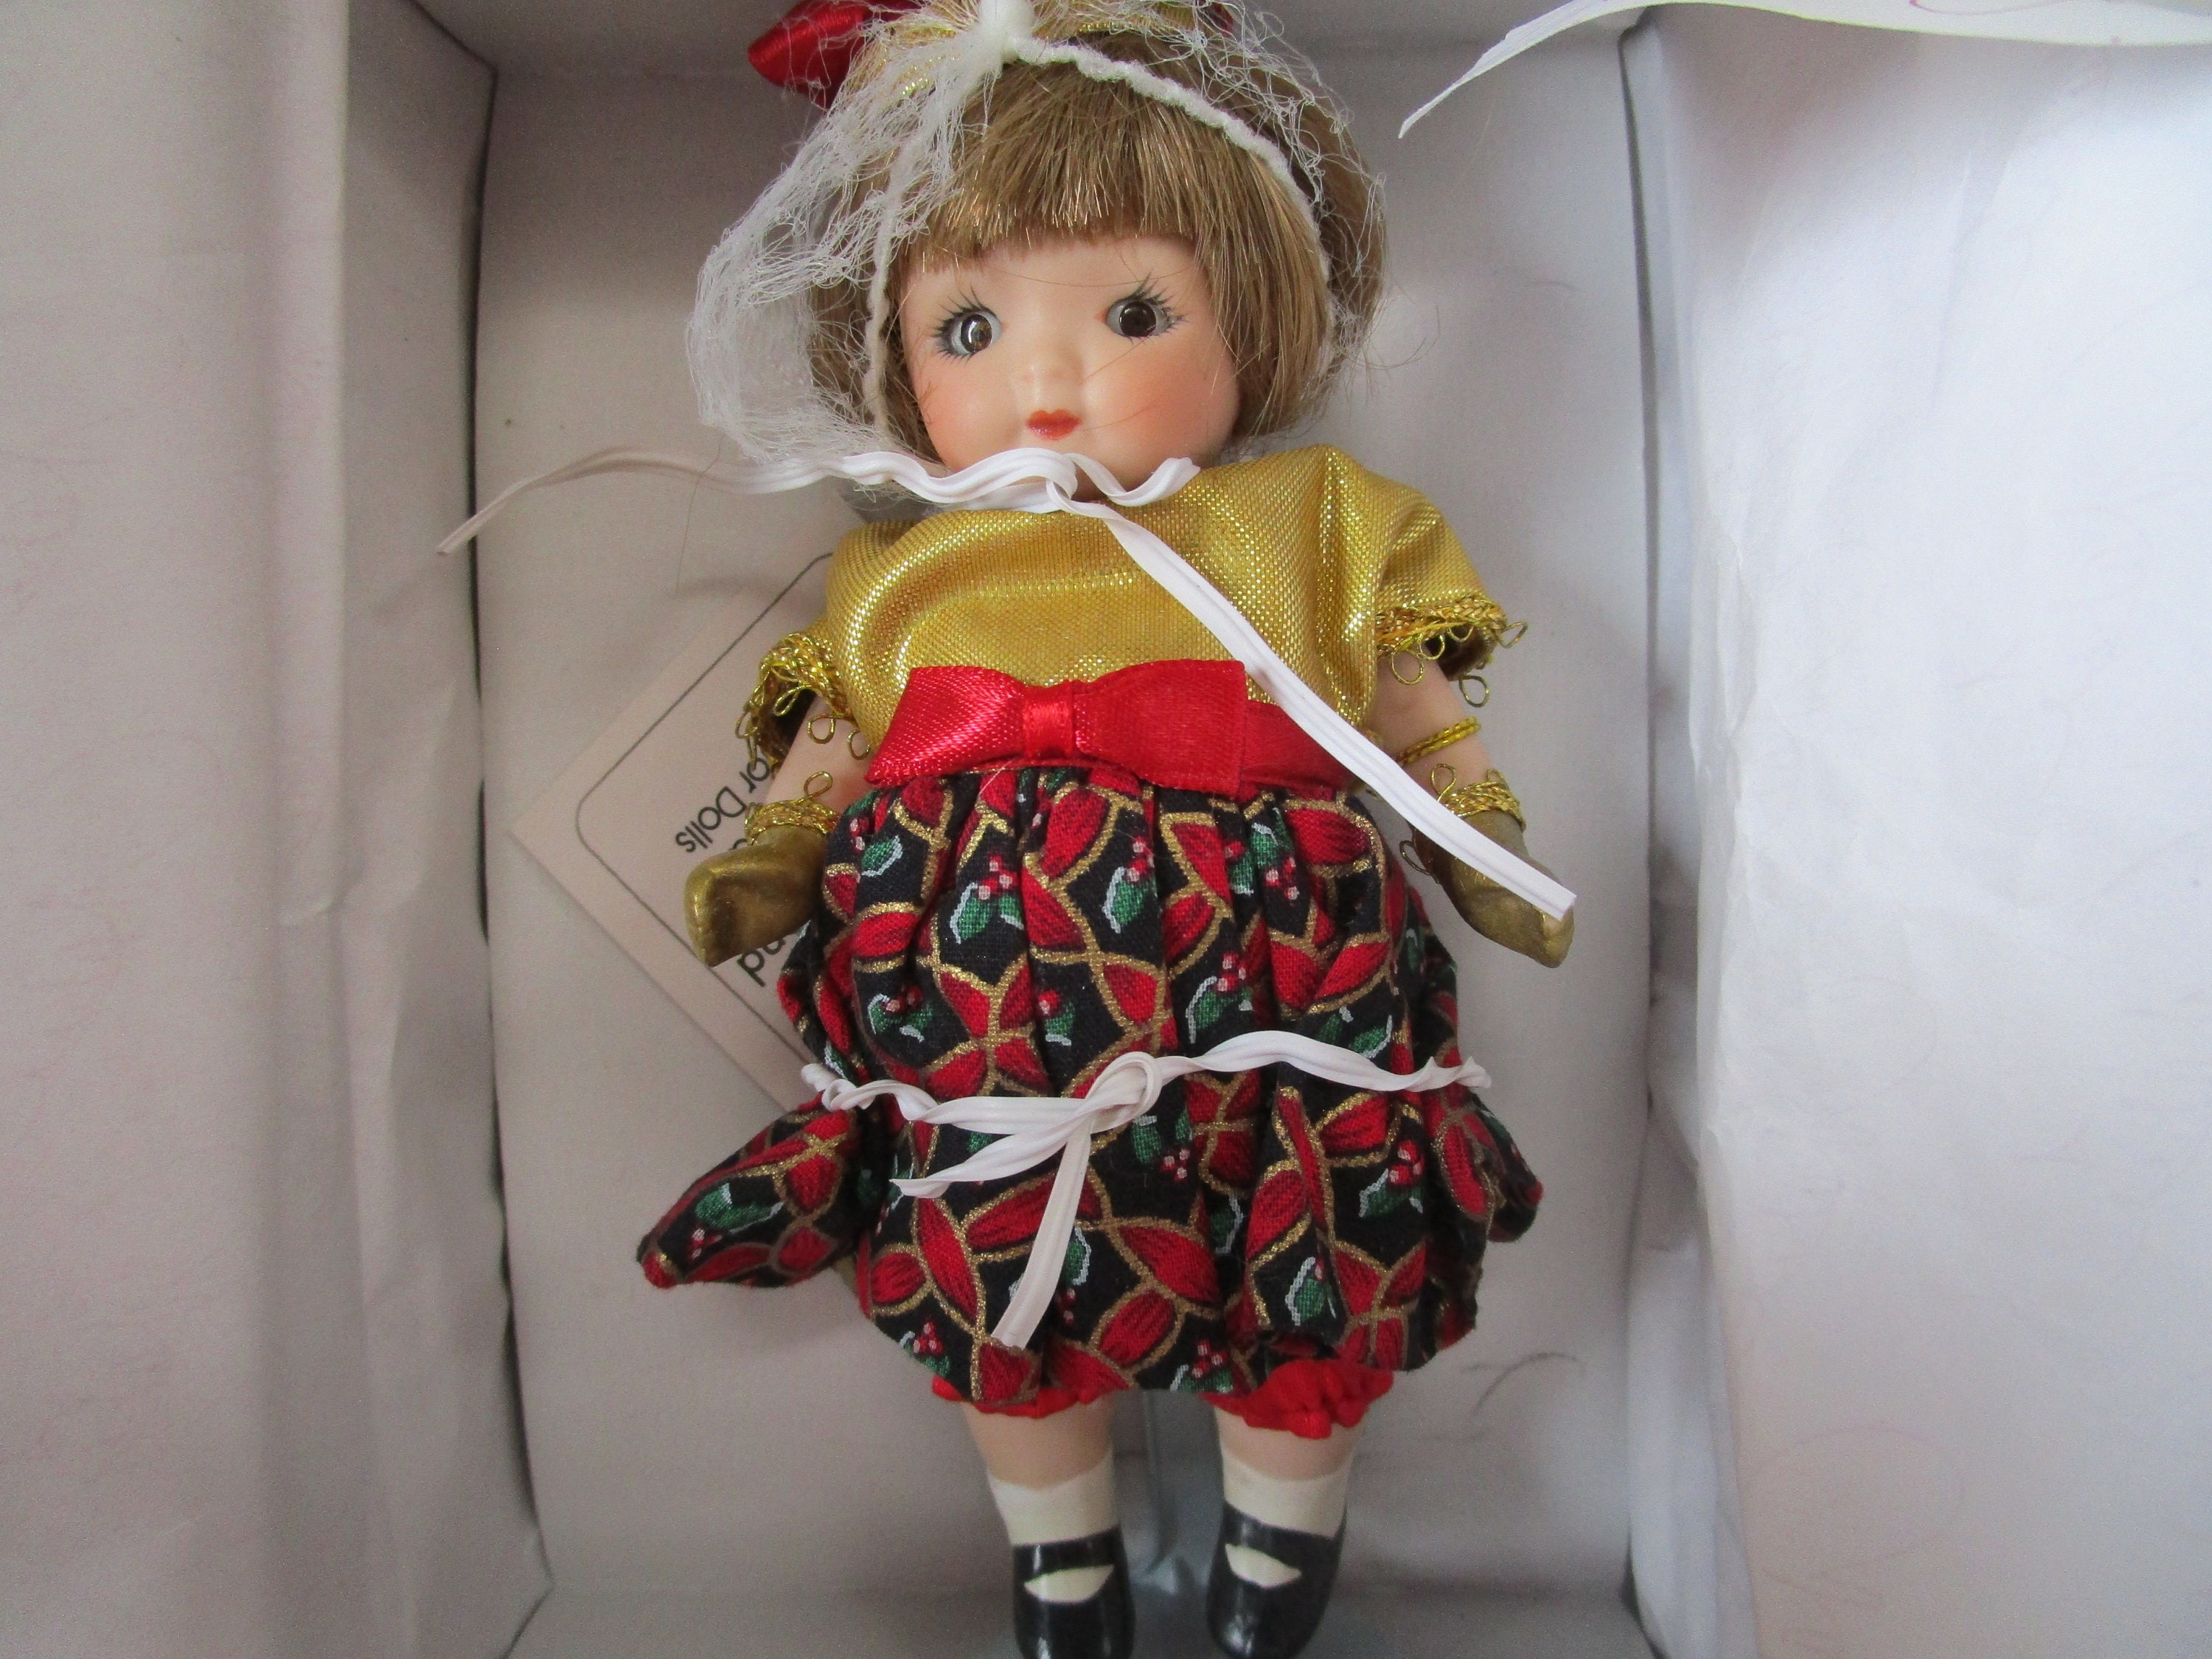 Vintage Marie Osmond Porcelain doll Mint in Box Milly Petite Amour Limited Edition of 3000